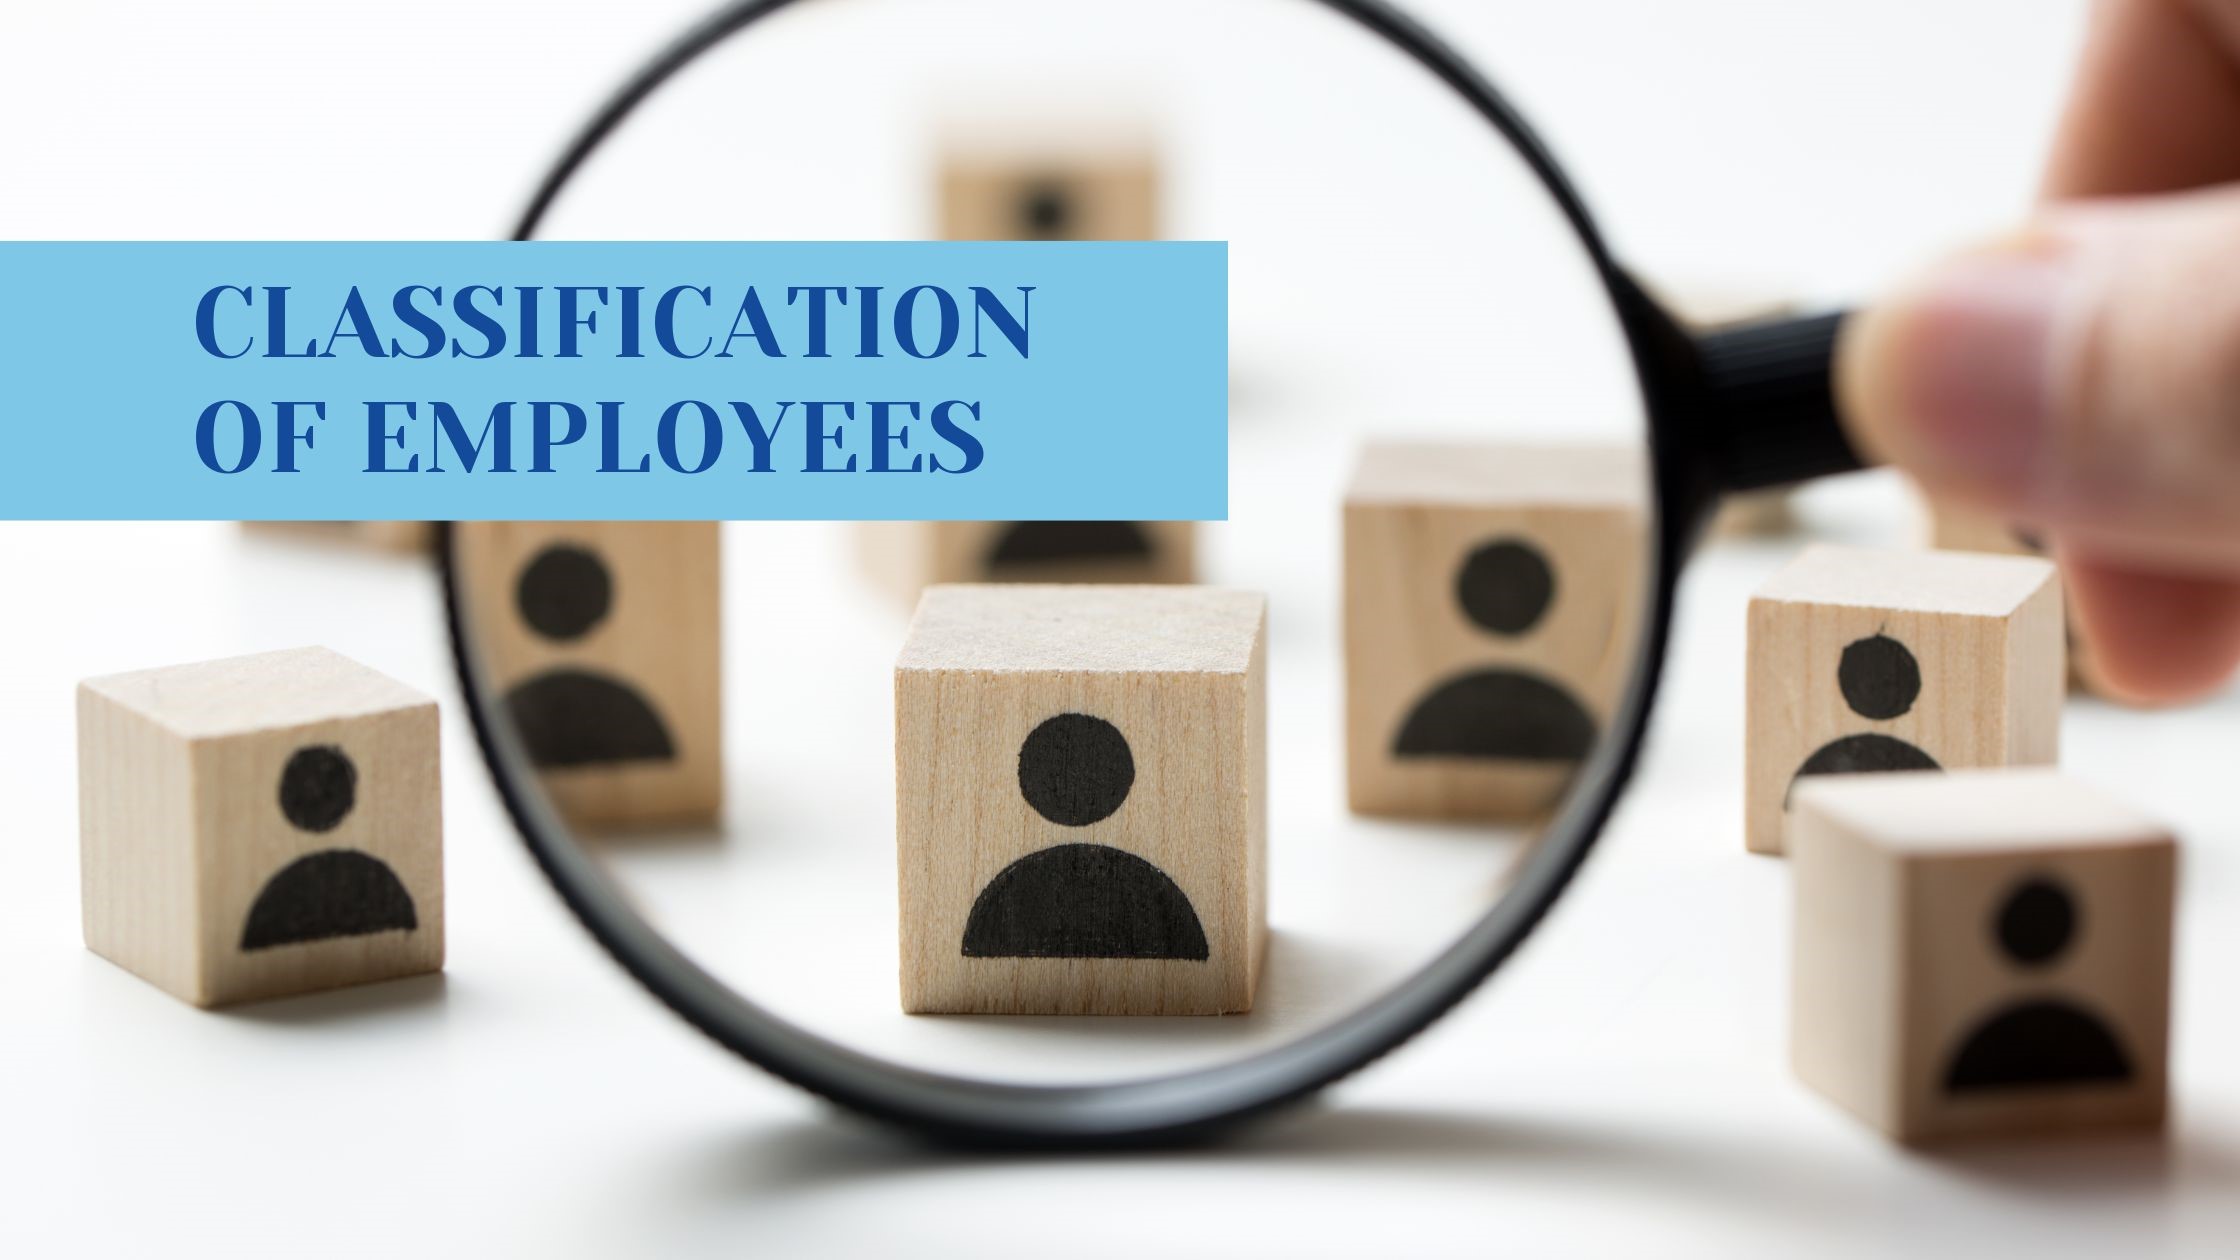 Classification of Employees